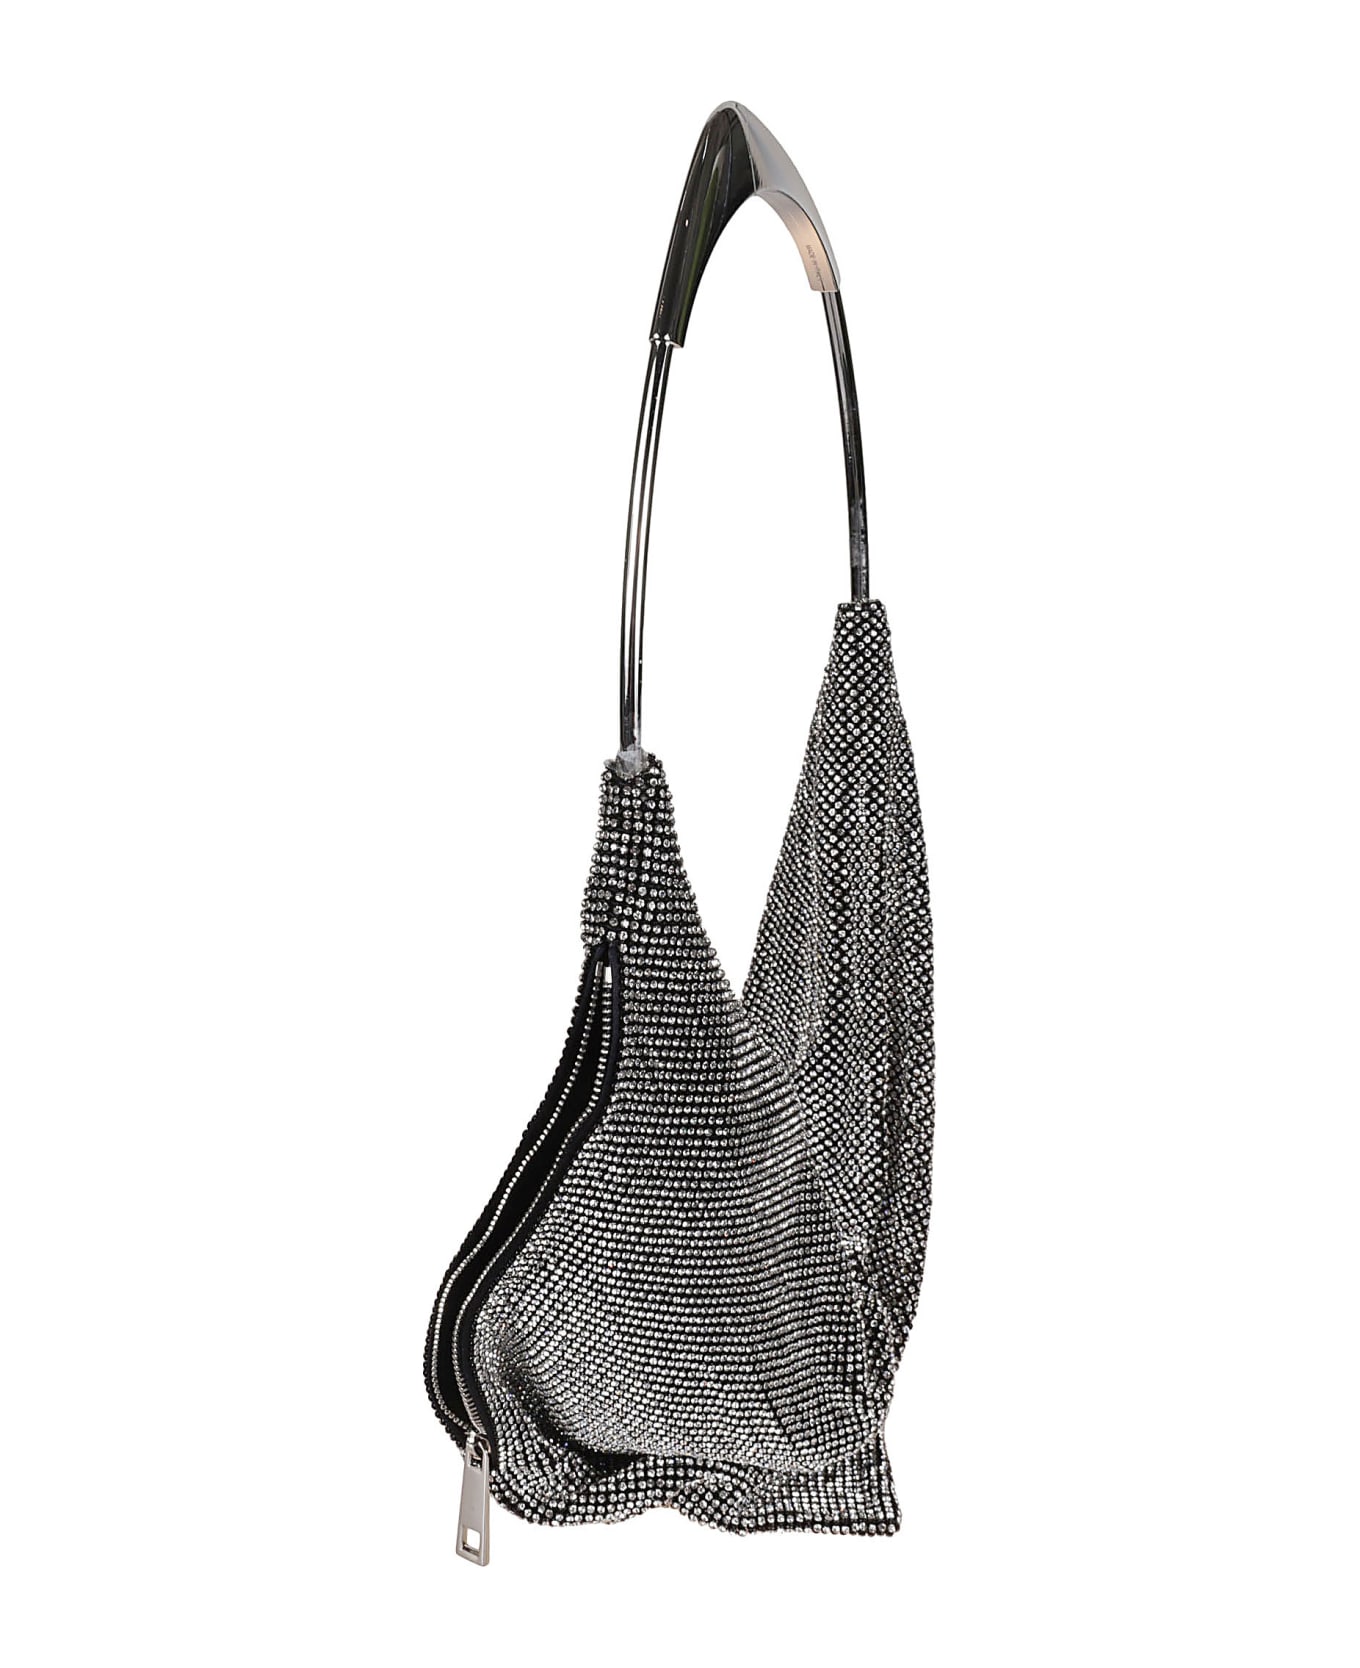 Benedetta Bruzziches Metal Handle Embellished Coating Tote - SpECTRE